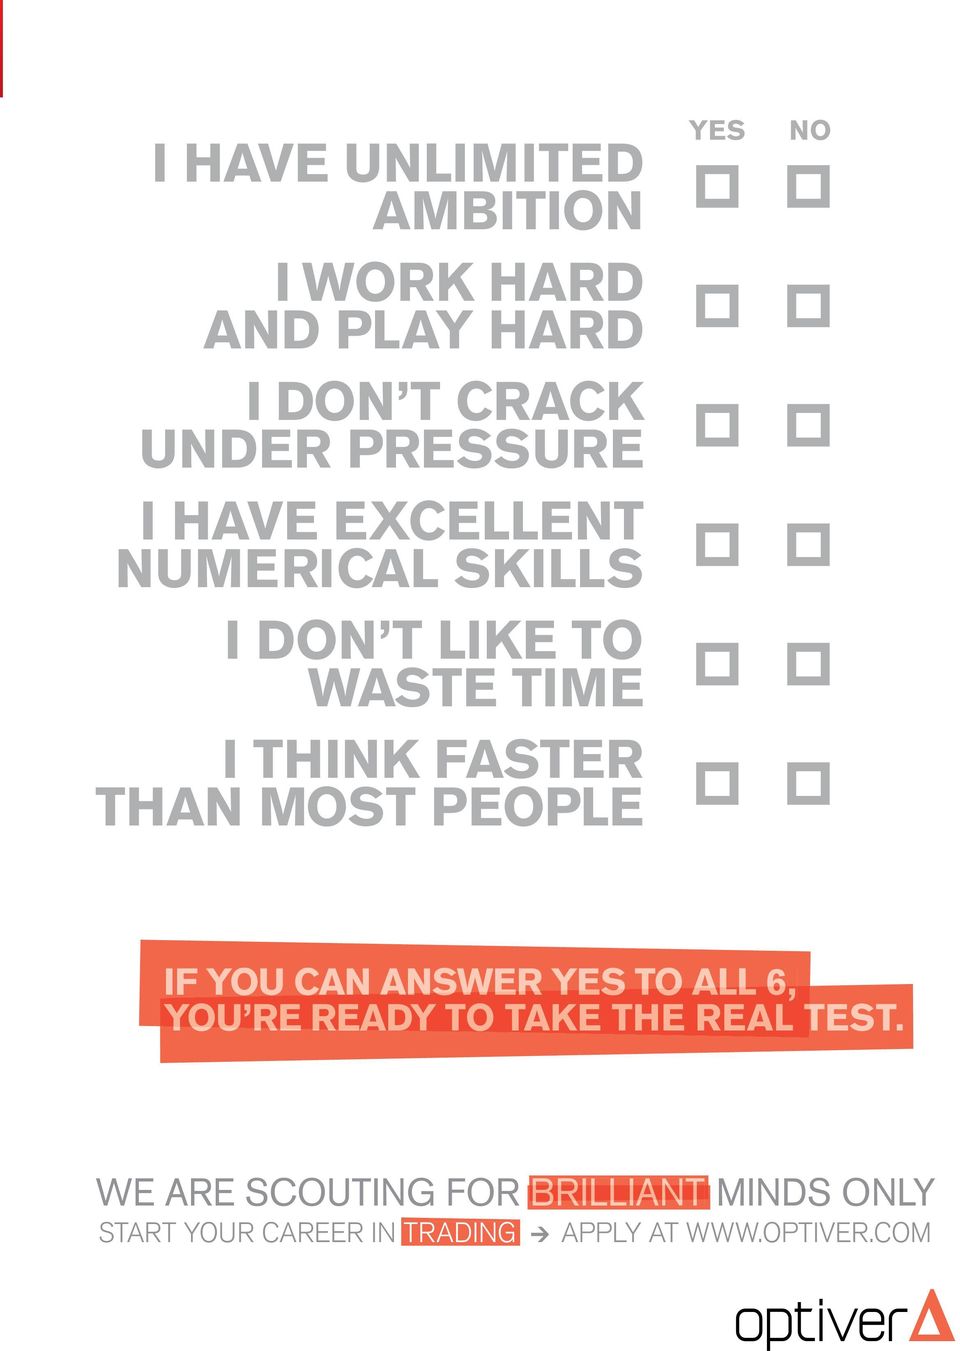 PEOPLE YES NO IF YOU CAN ANSWER YES TO ALL 6, YOU RE READY TO TAKE THE REAL TEST.